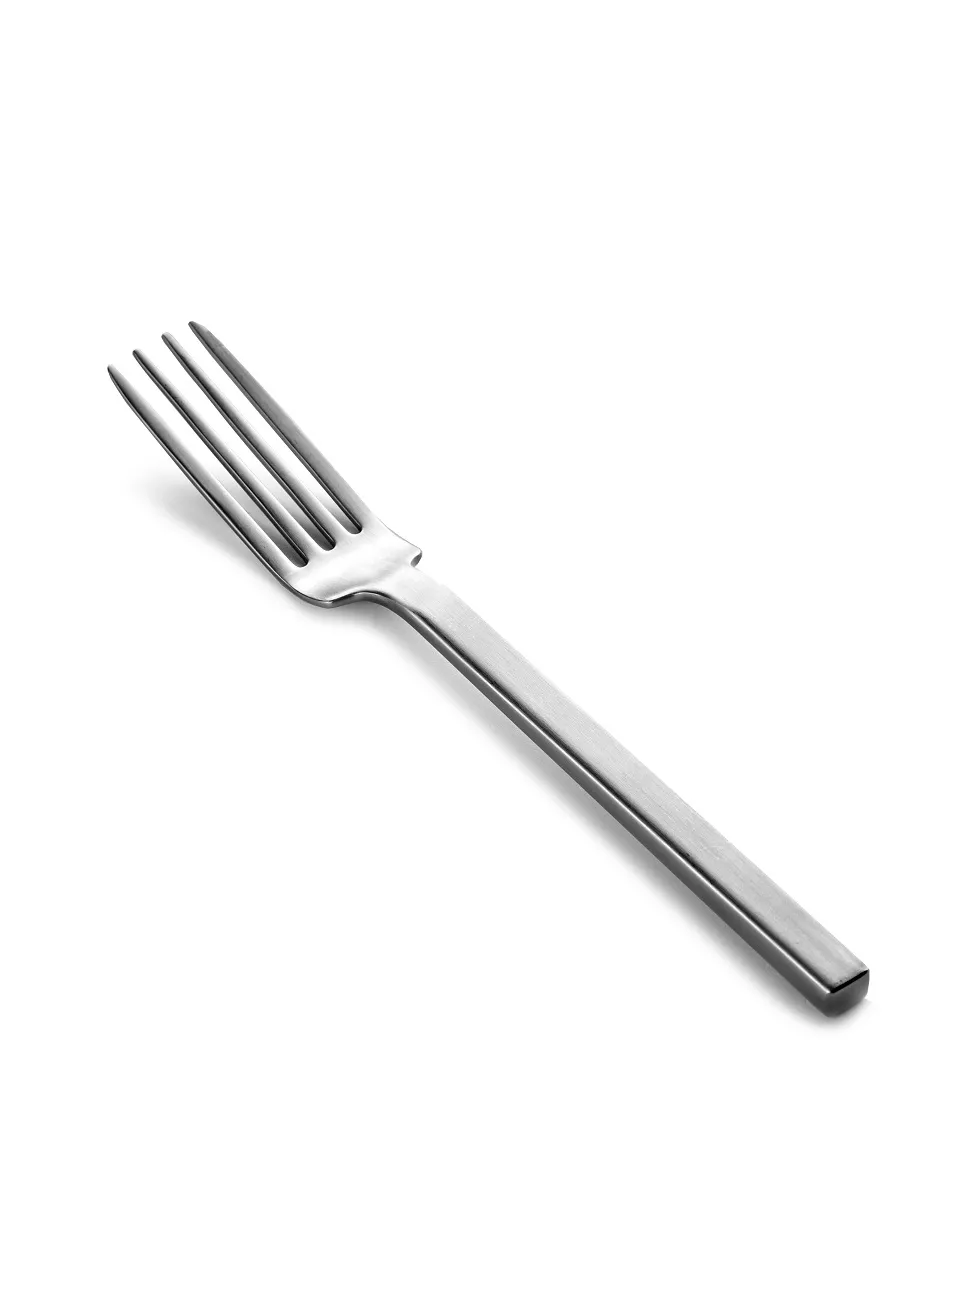 Table Fork Collection Heii by Serax